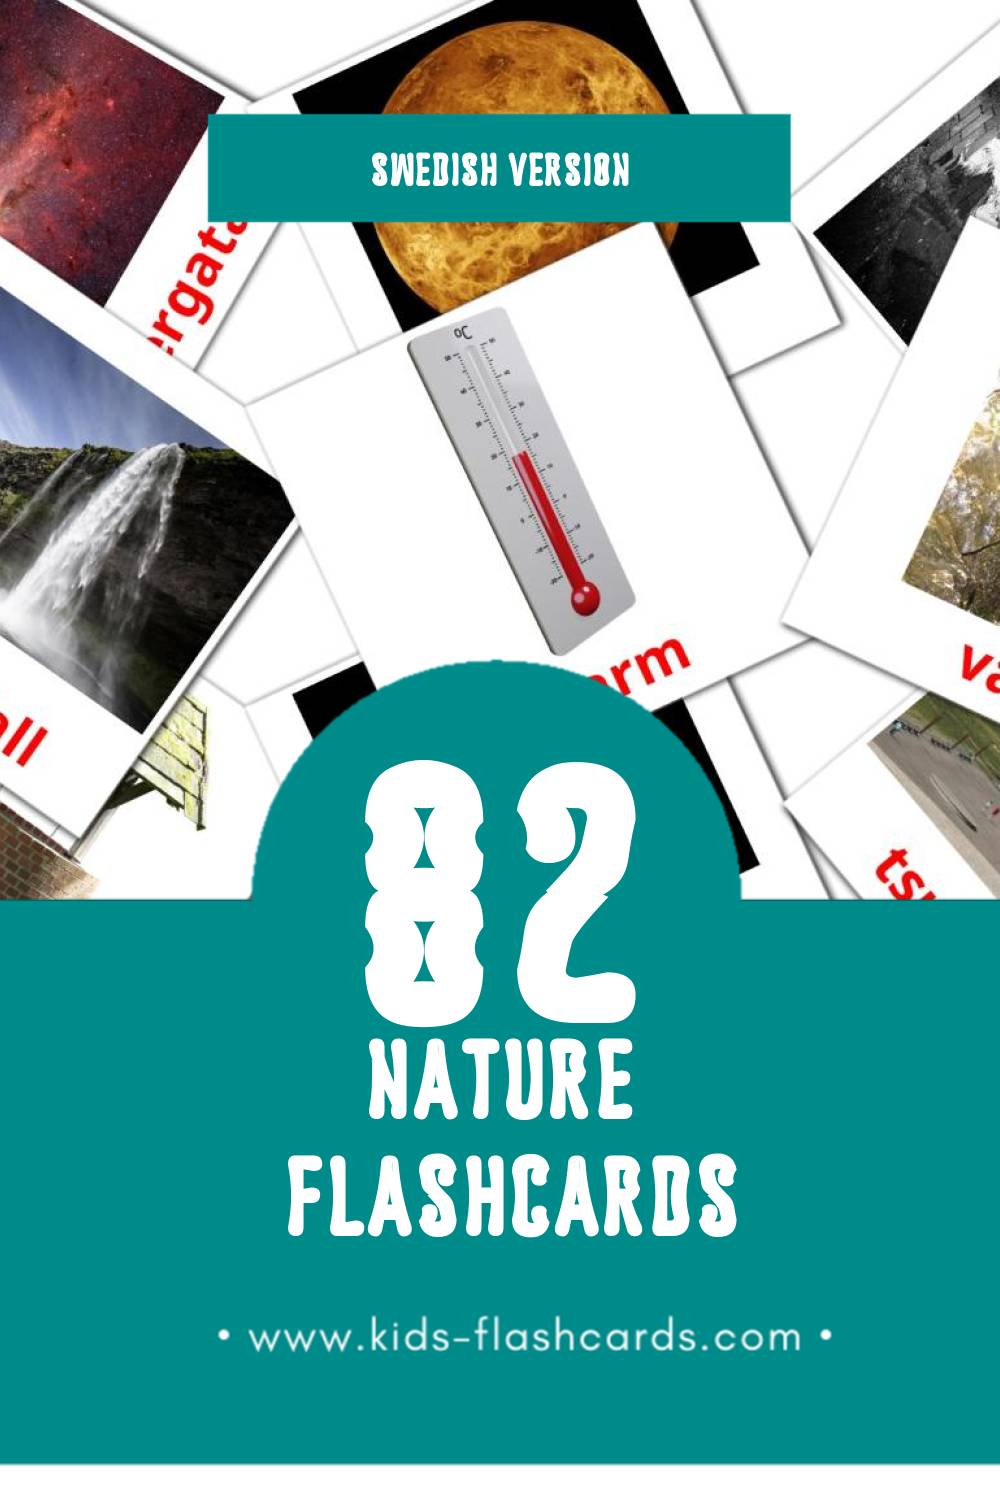 Visual Natur Flashcards for Toddlers (82 cards in Swedish)